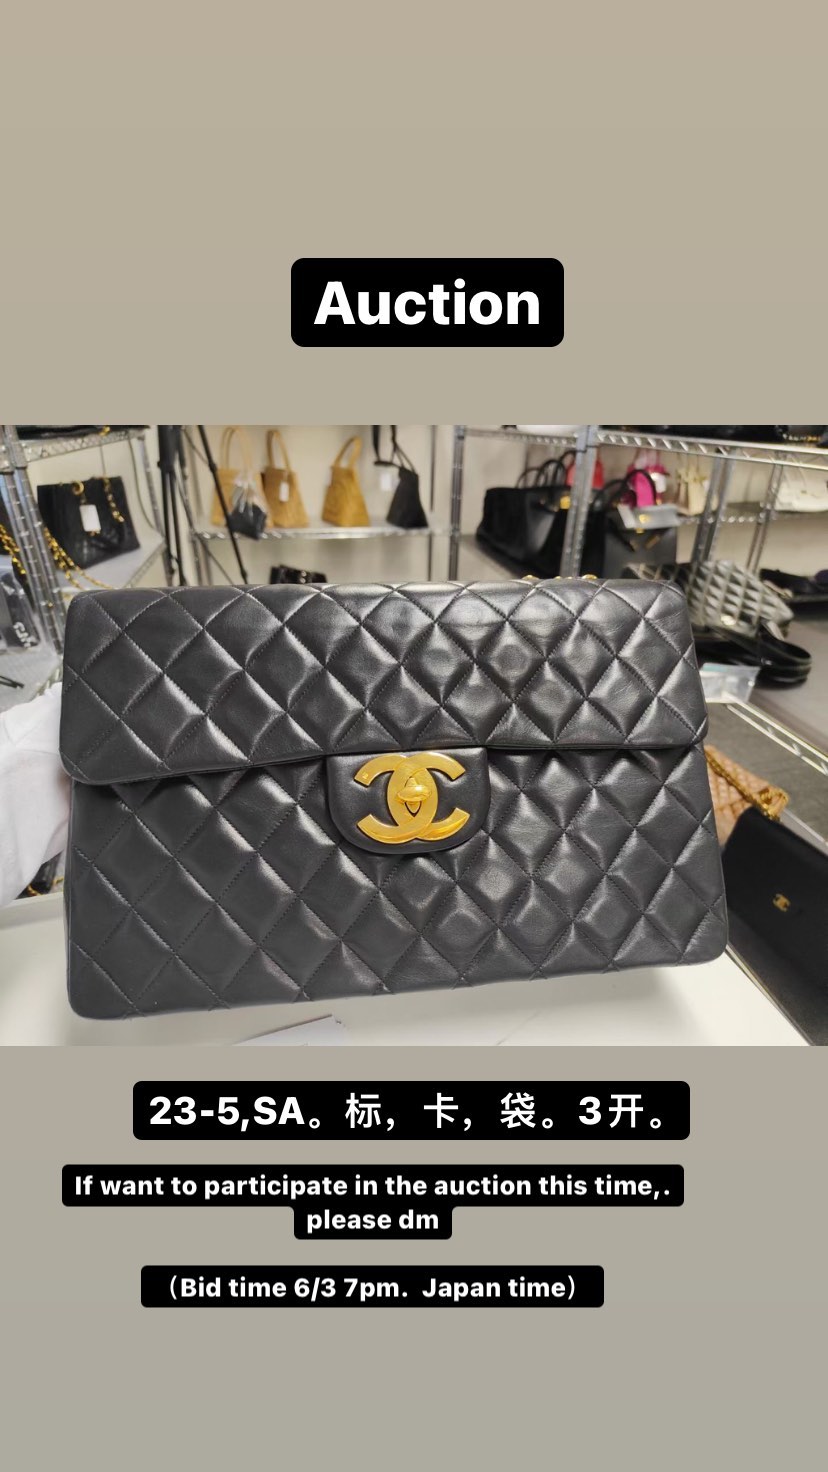 CHEAP LUXURY BRAND AUCTION IN JAPAN